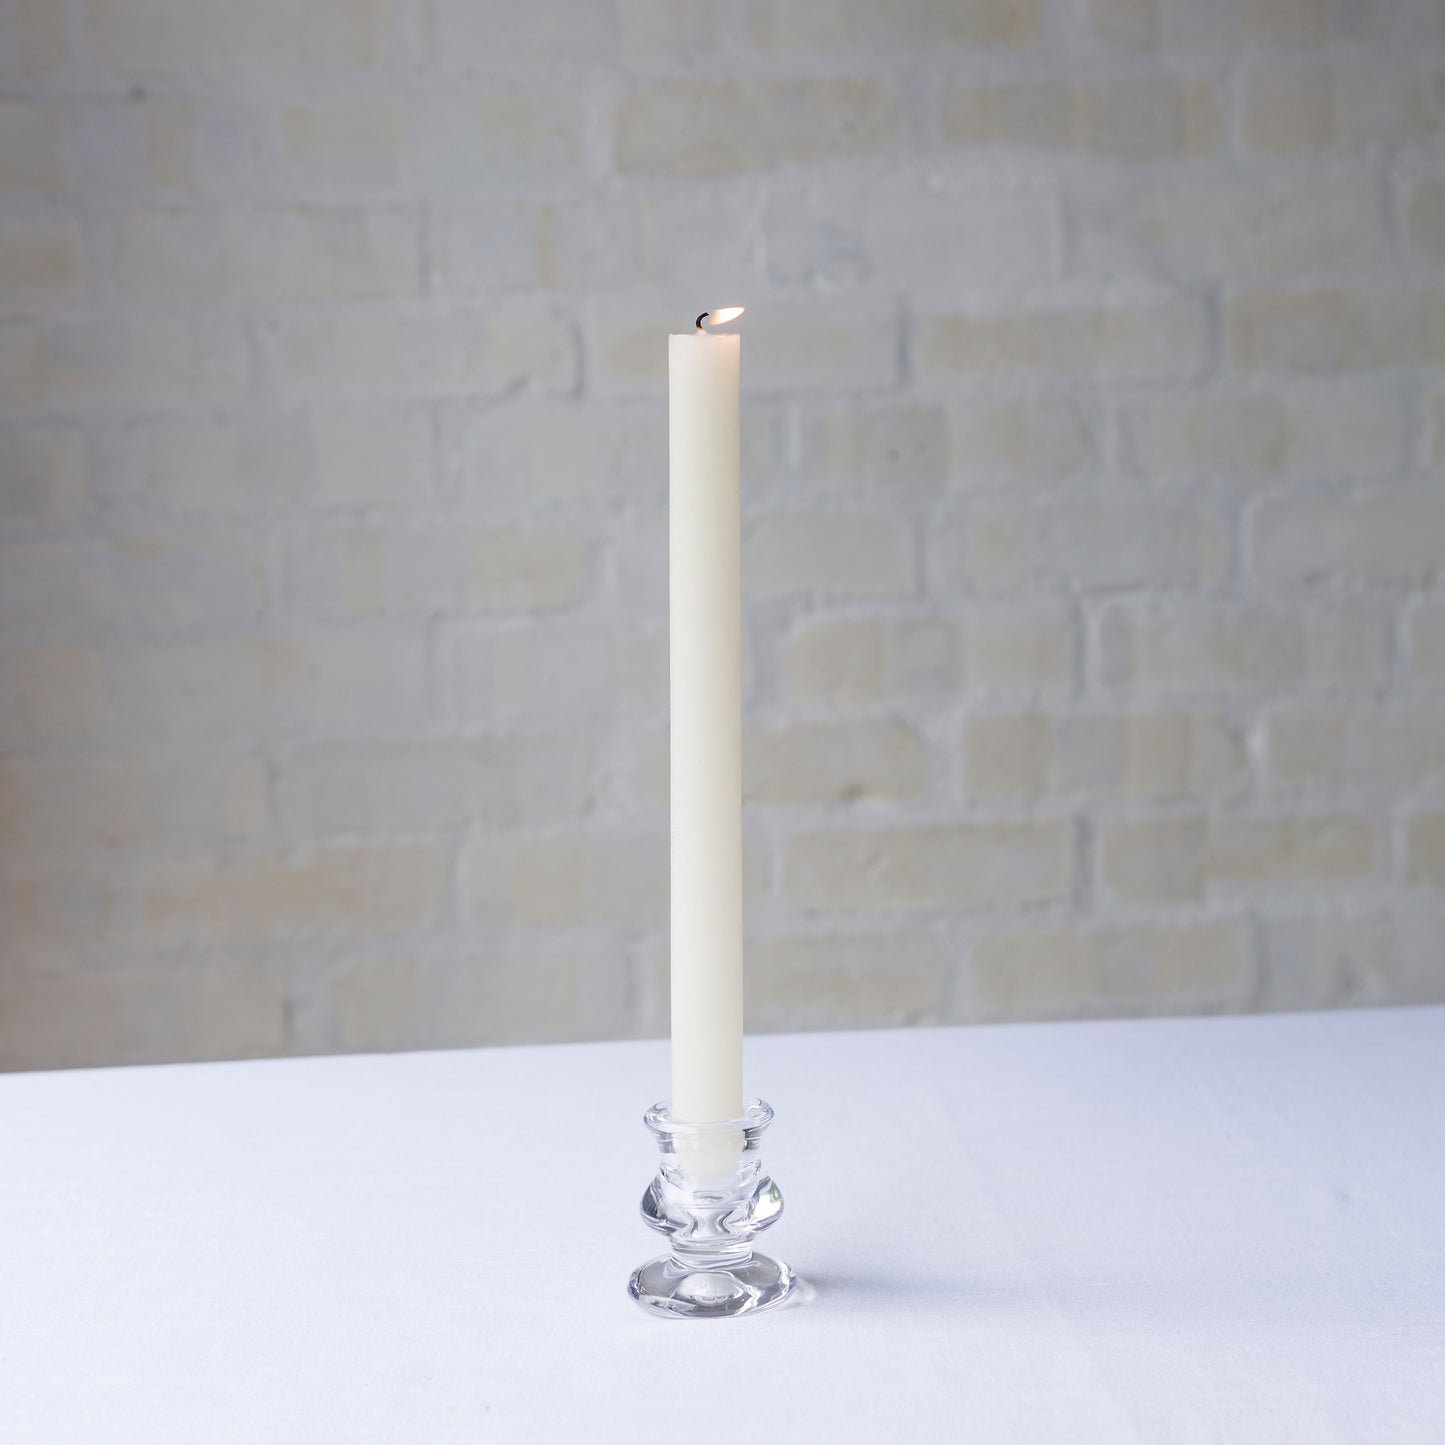 Dinner candle in clear glass holder